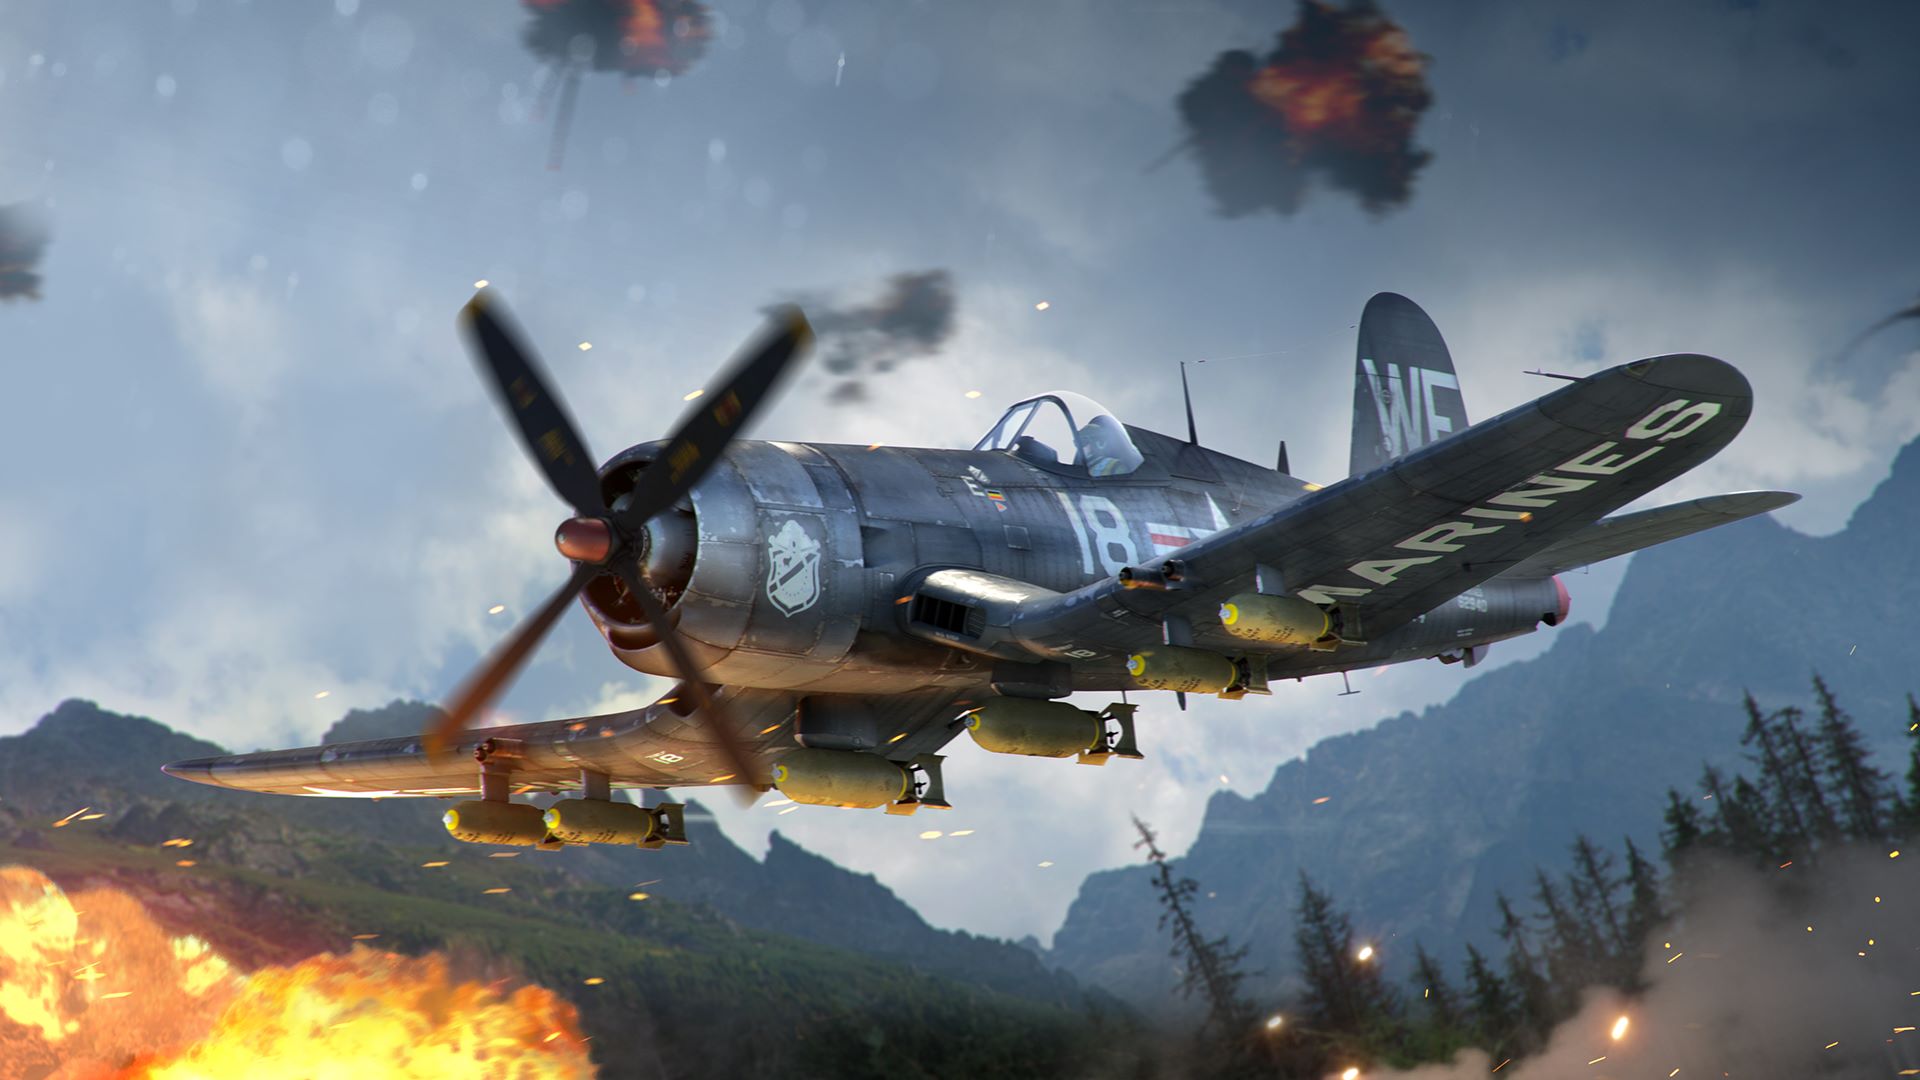 General 1920x1080 video games video game art digital art war War Thunder airplane explosion bombs forest military military vehicle military aircraft World War II Vought F4U Corsair PC gaming vehicle propeller